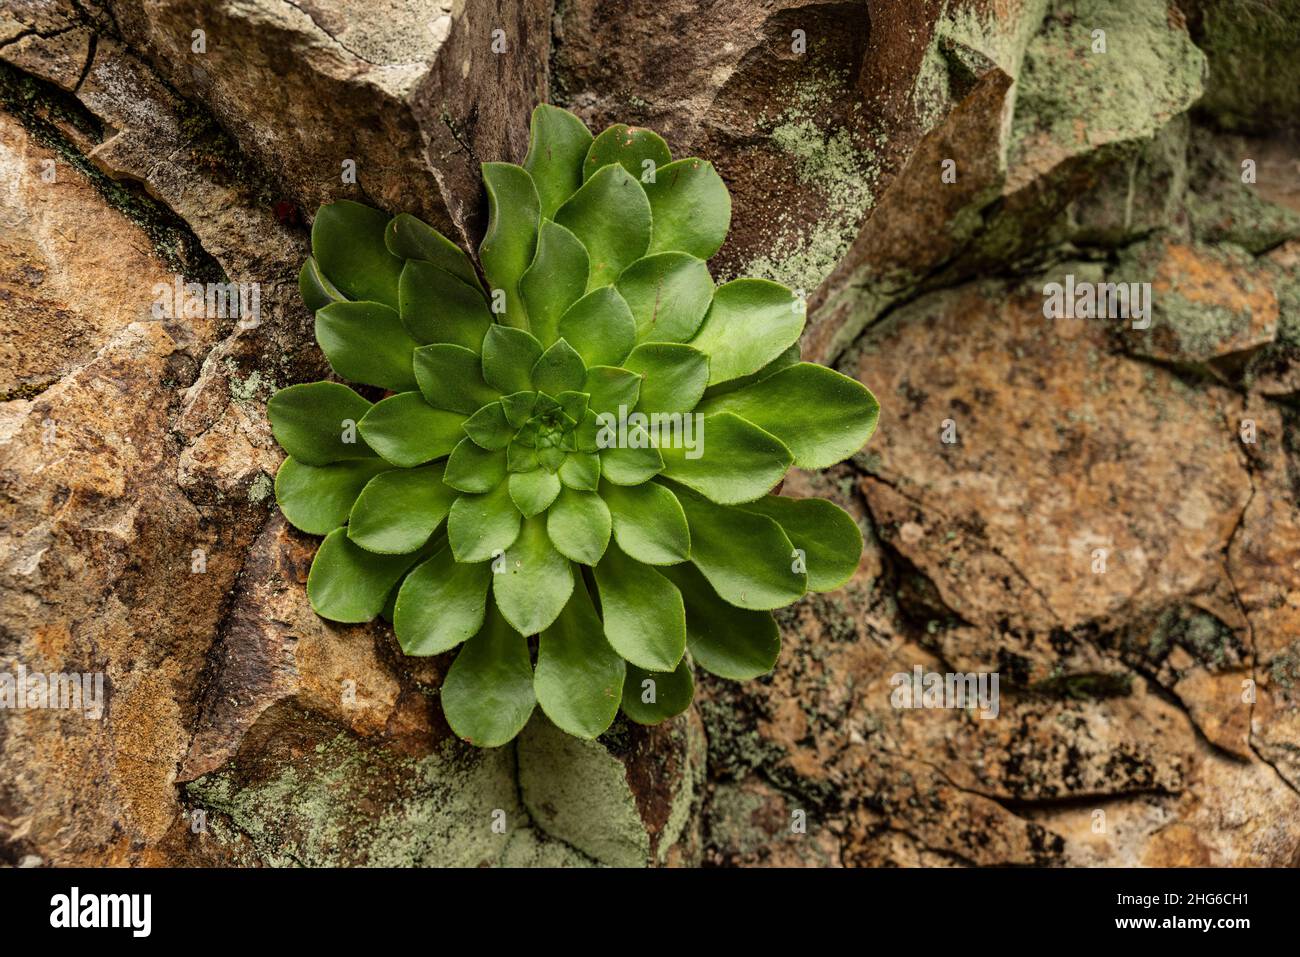 Close-up of a large “Aeonium glutinosum” succulent growing on volcanic rocks on the island of Madeira, Portugal Stock Photo